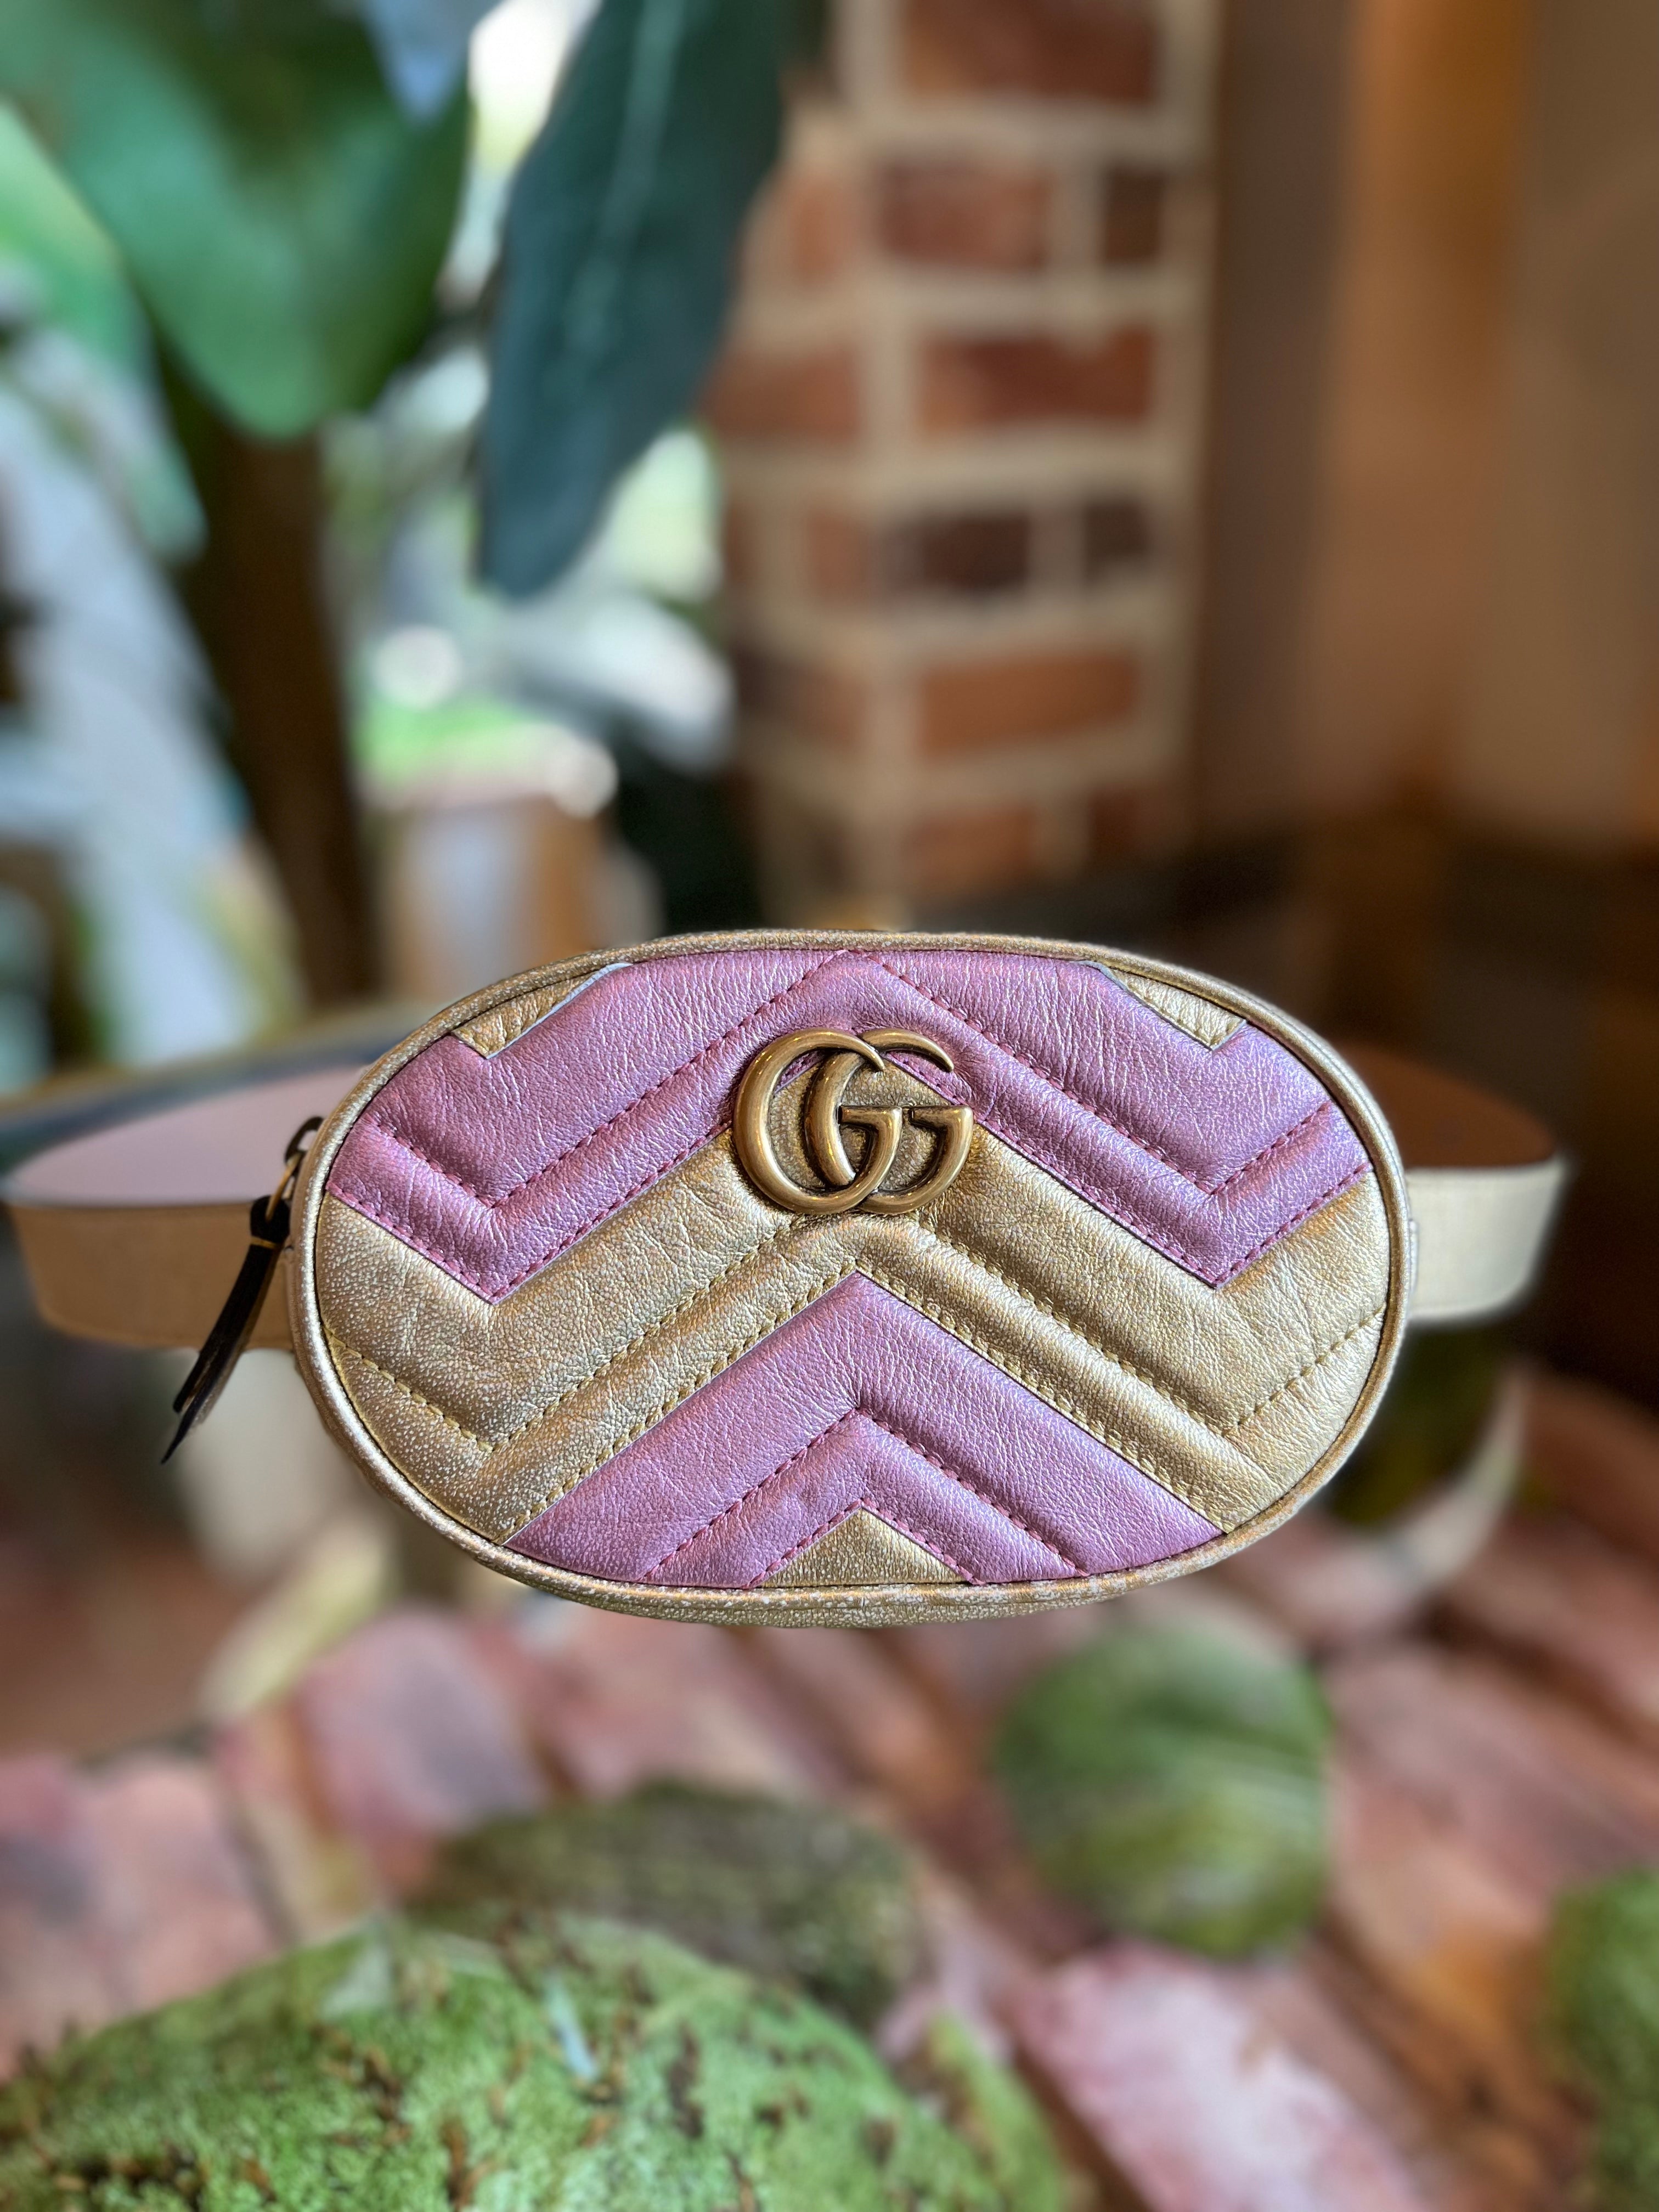 Gucci GG Marmont Leather Belt Bag Perfect Pink